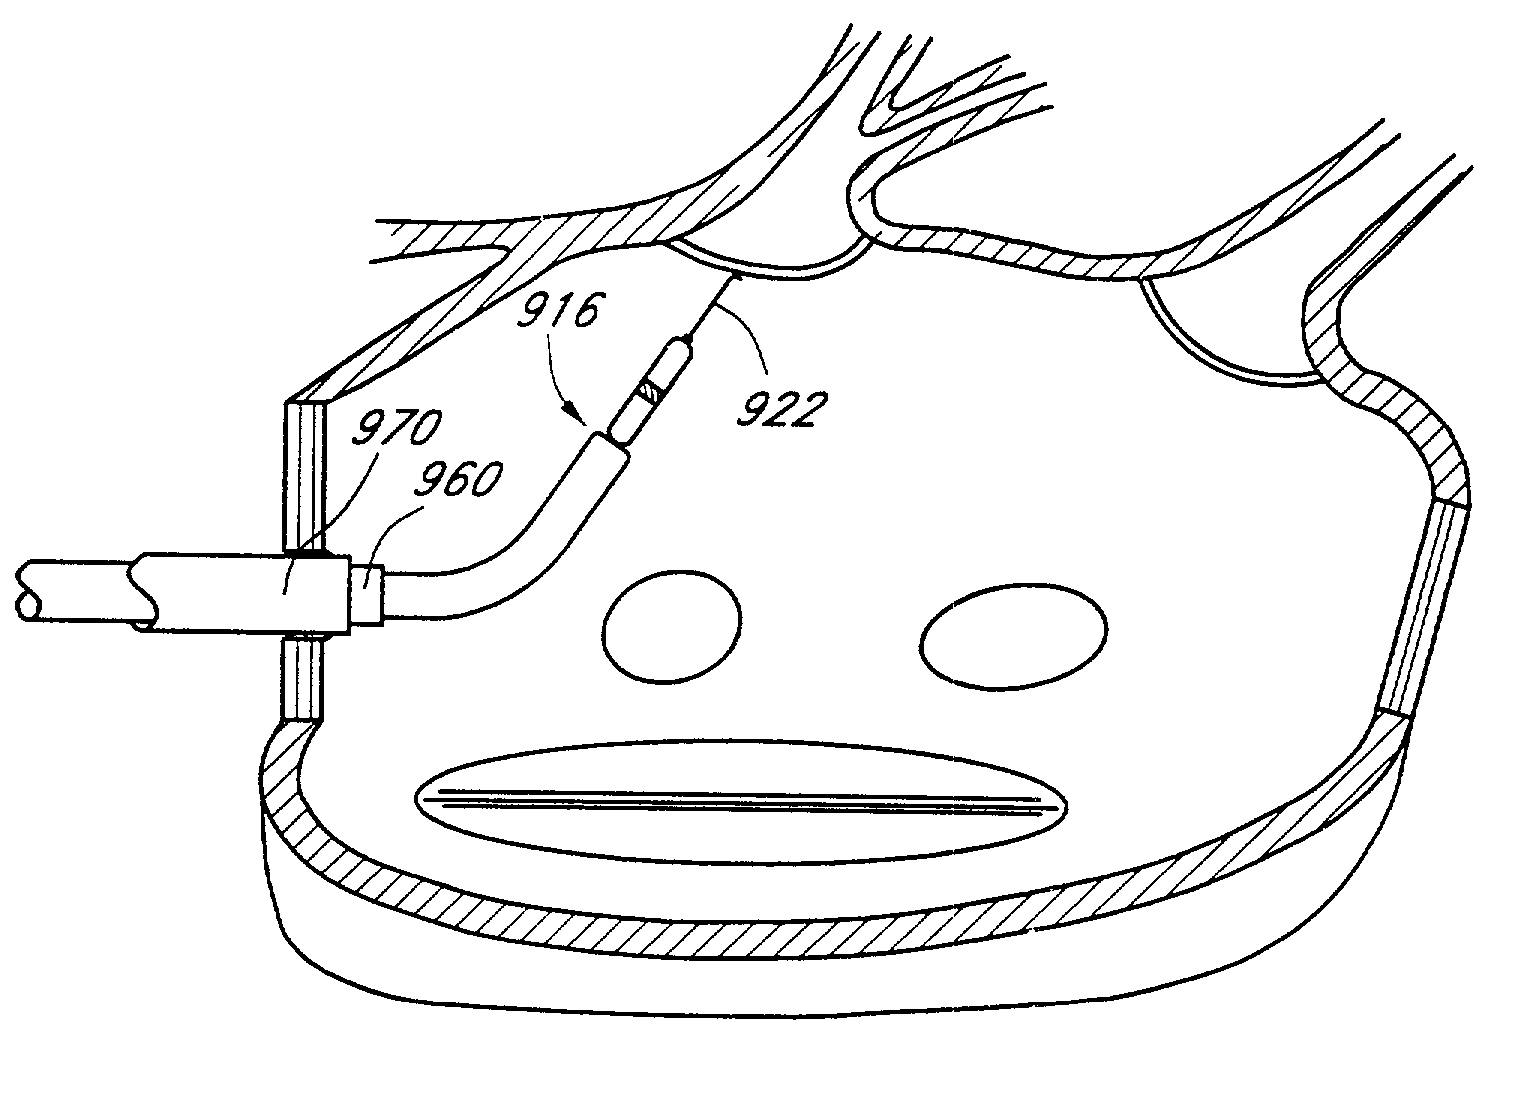 Deflectable tip catheter with guidewire tracking mechanism